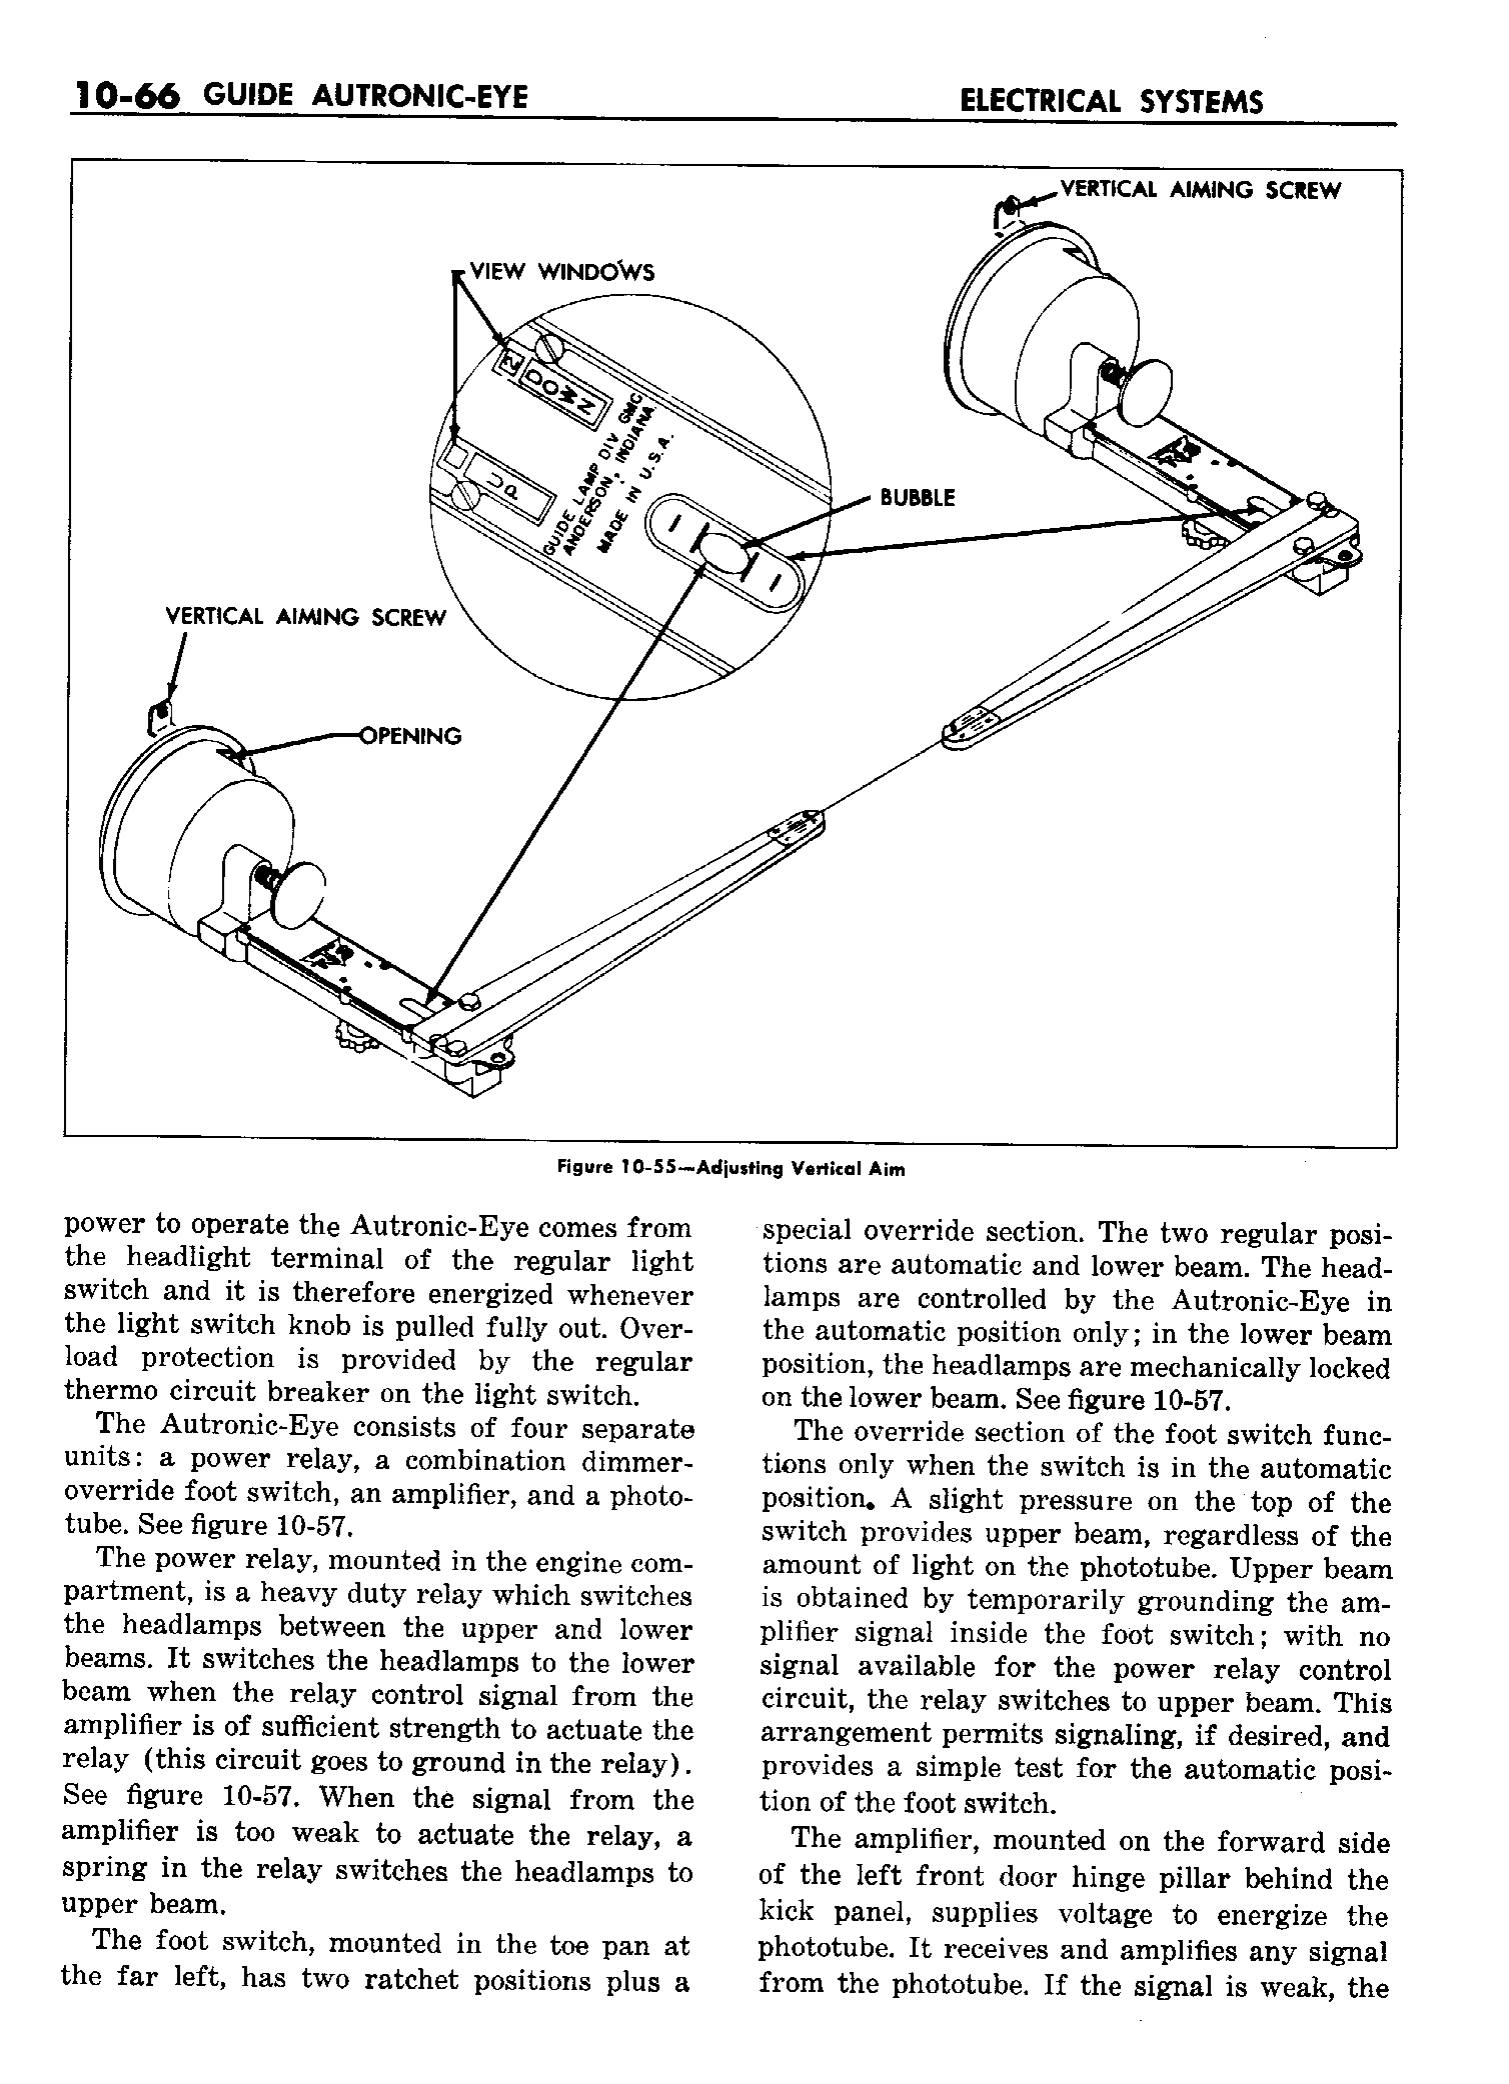 n_11 1958 Buick Shop Manual - Electrical Systems_66.jpg